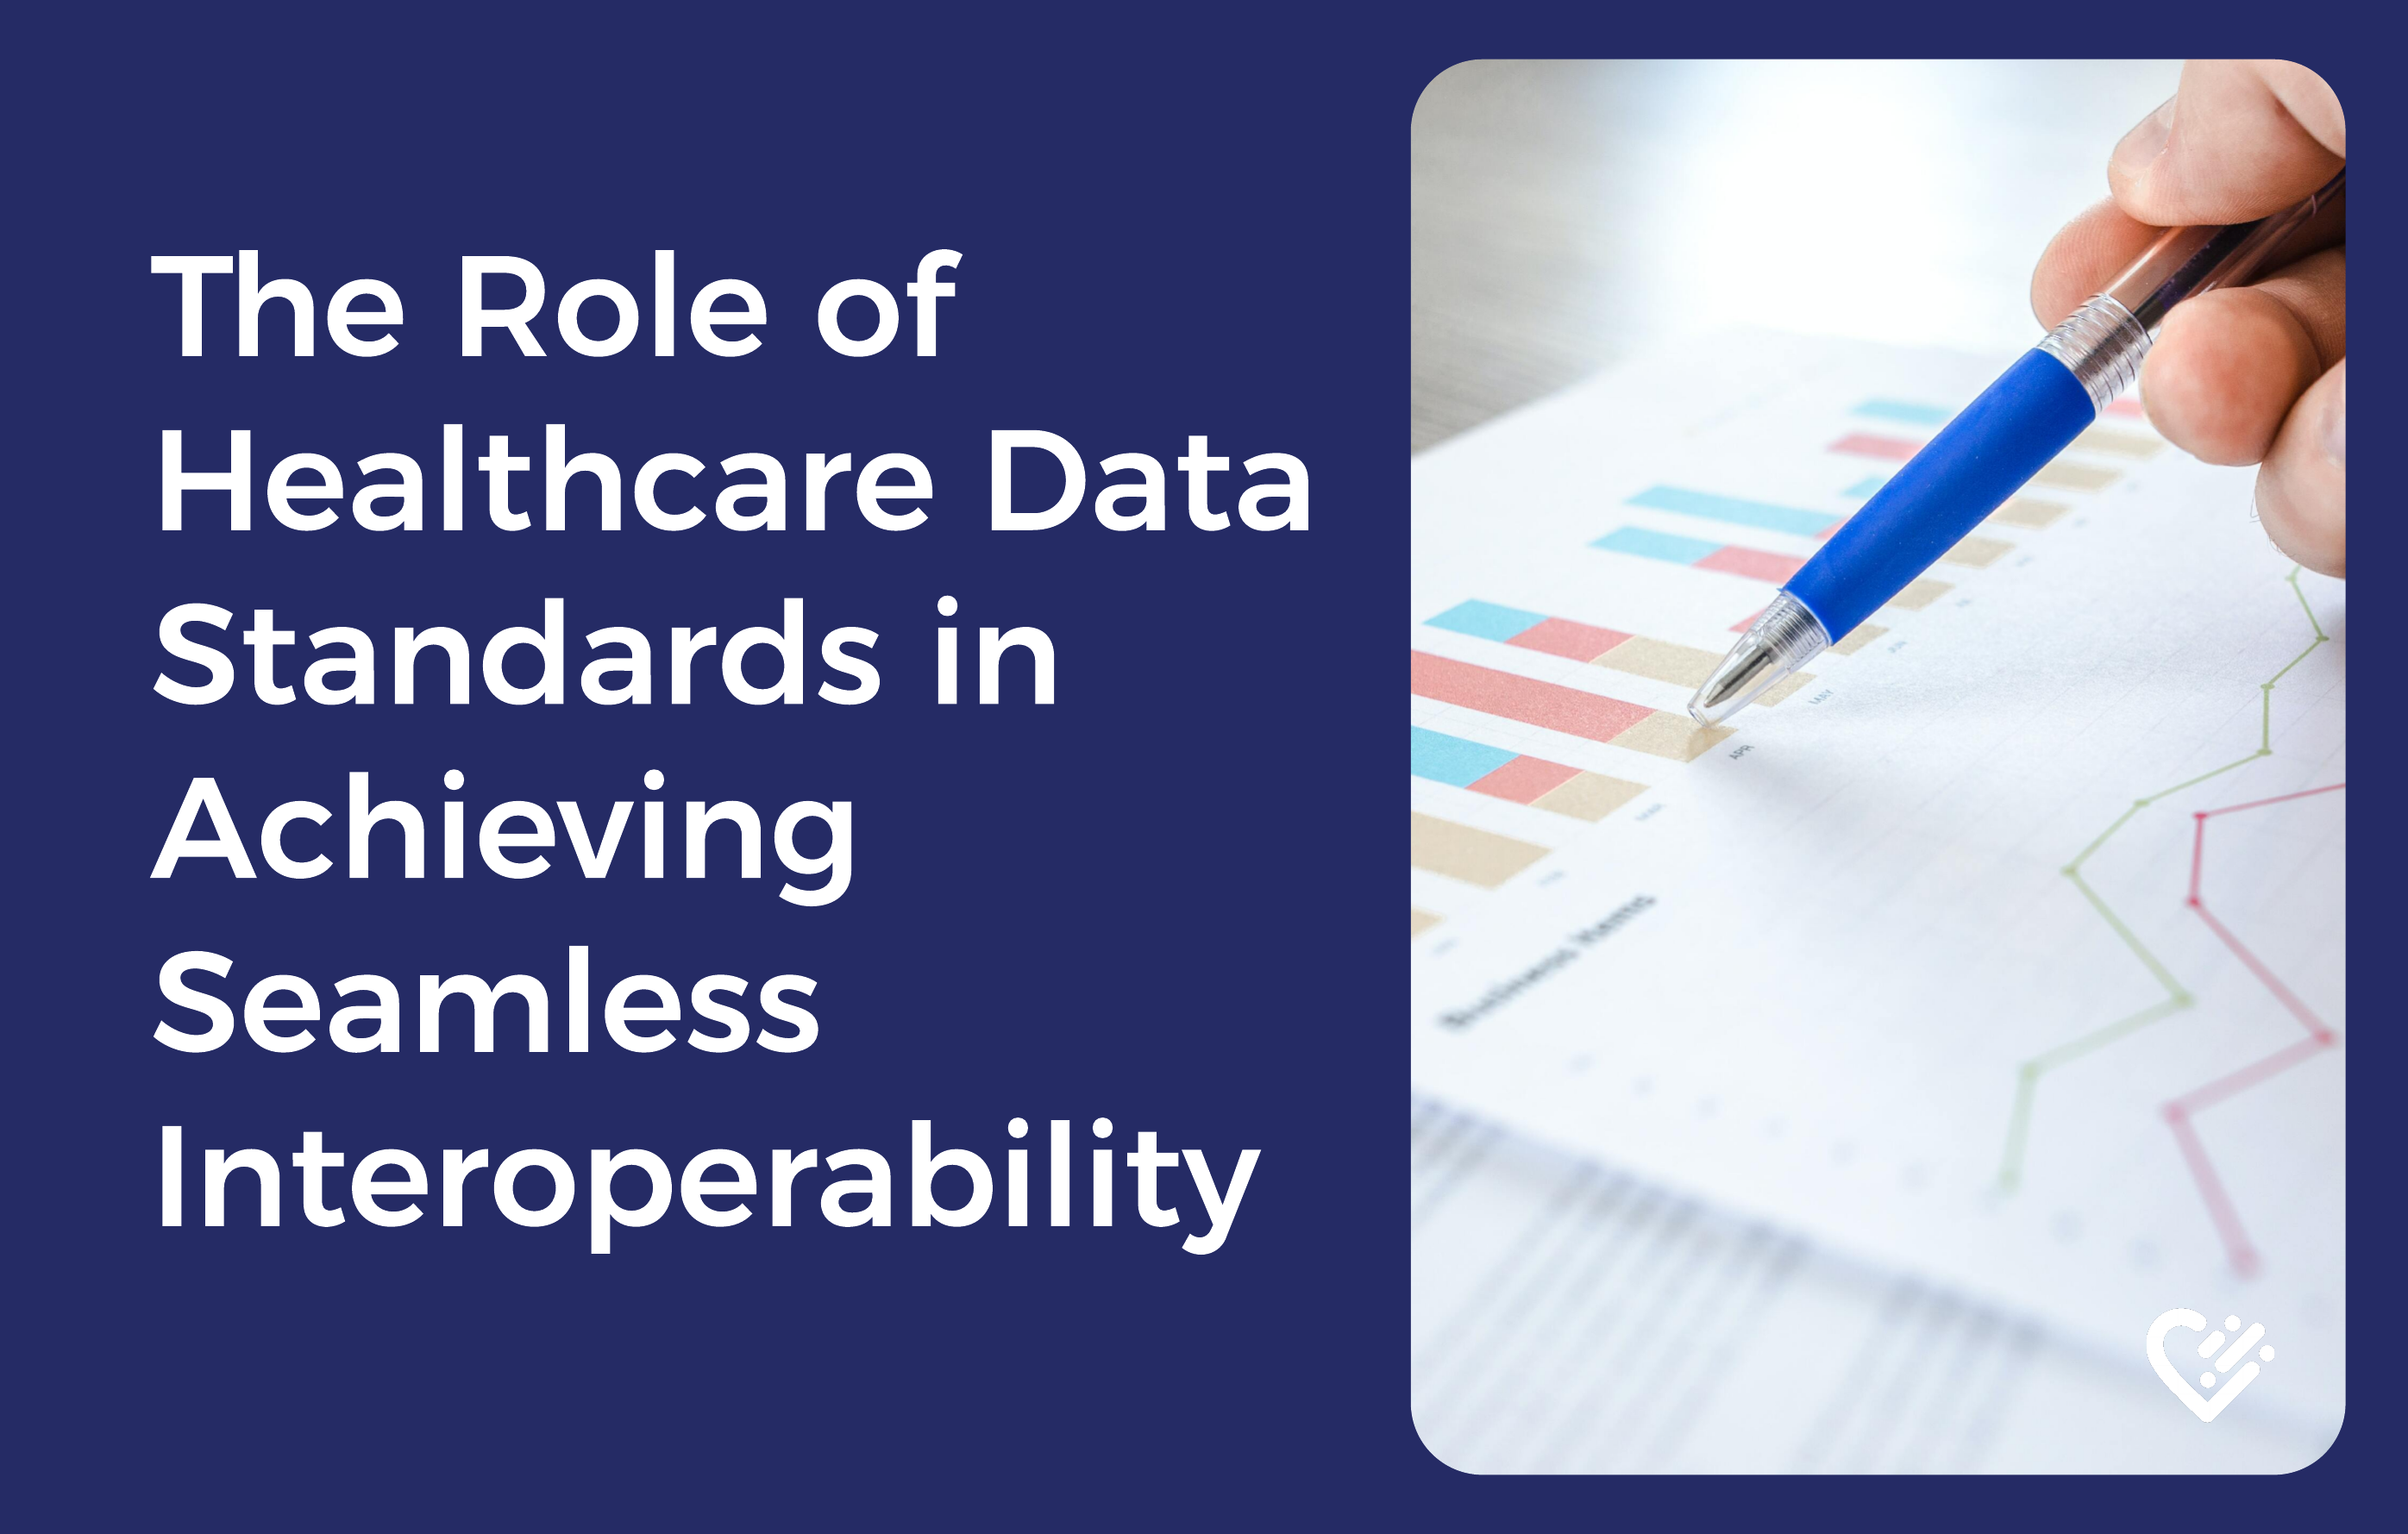 The Role of Healthcare Data Standards in Achieving Seamless Interoperability